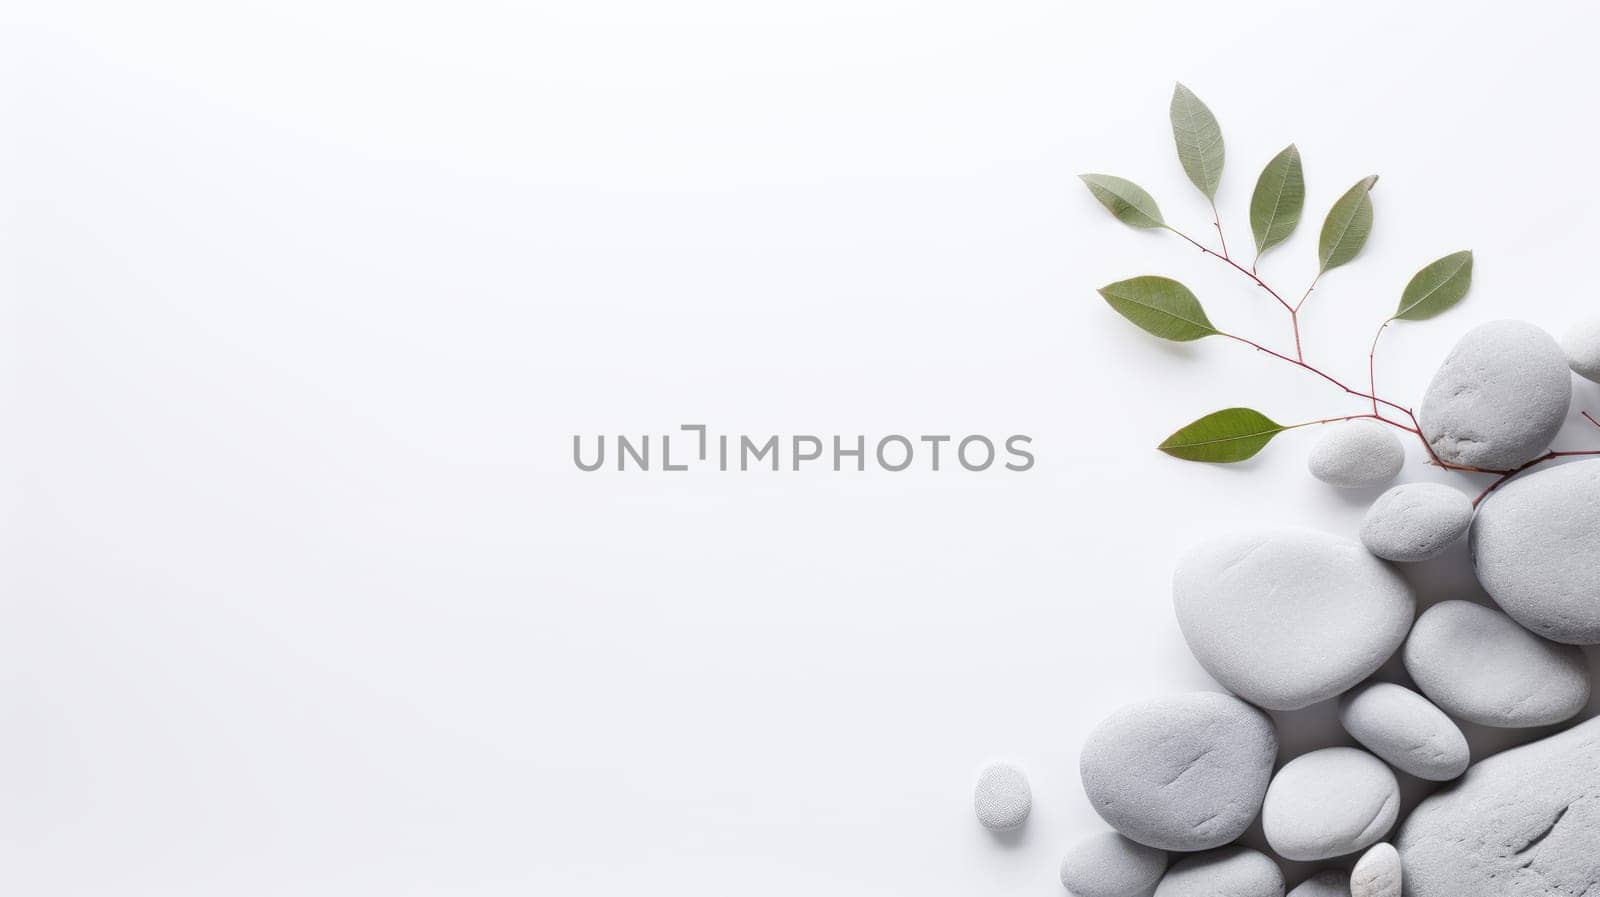 a minimalist design of white pebbles and green leaves on a white background, creating a sense of balance, tranquility, and harmony. High quality photo